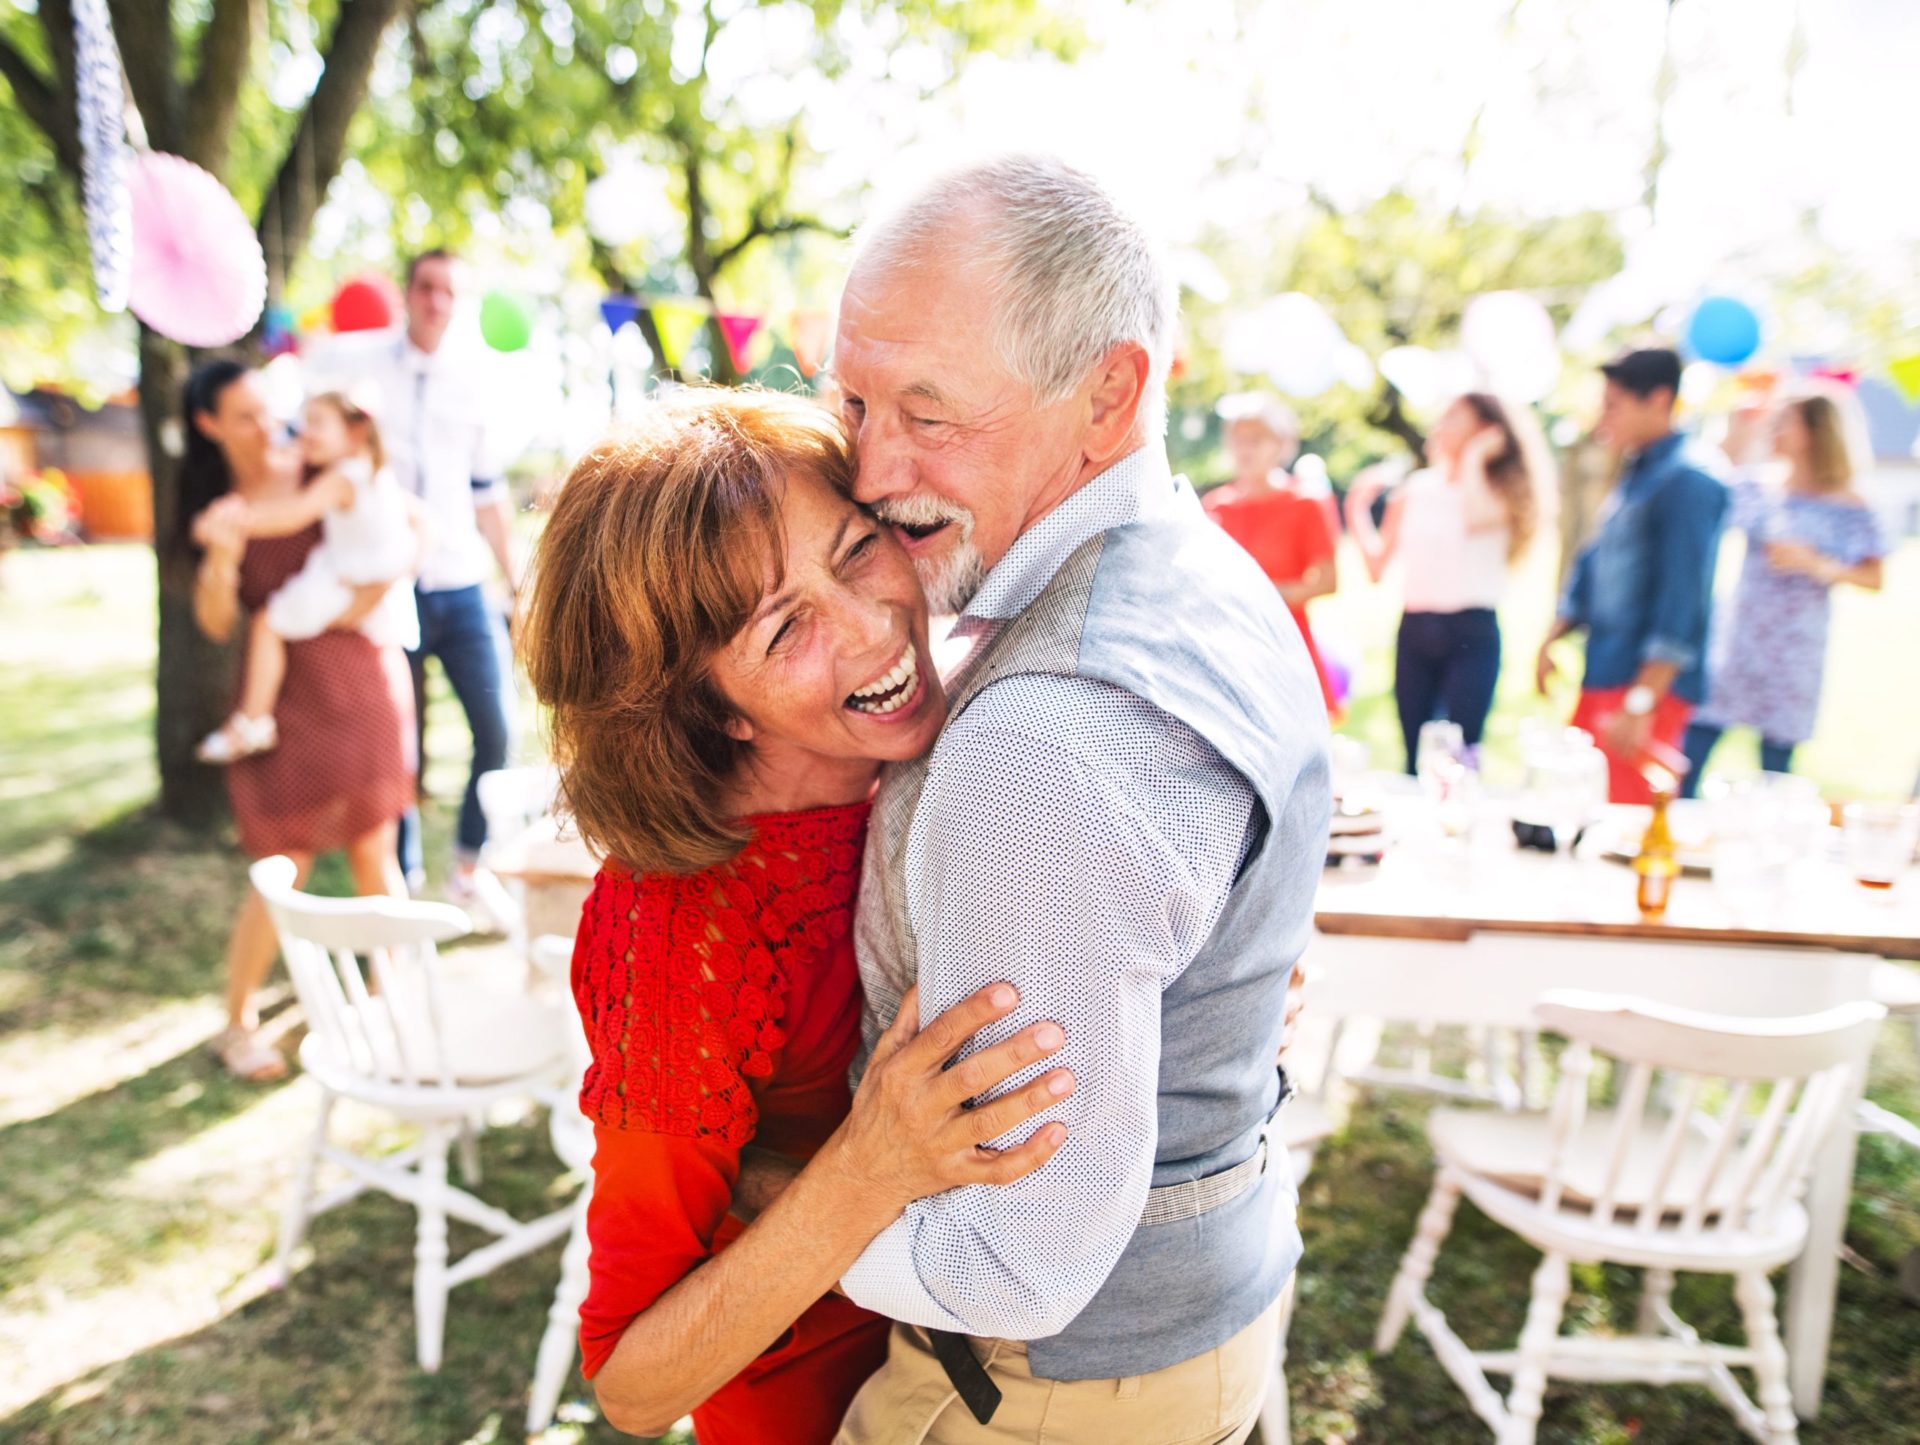 A senior couple dancing and laughing together at a party